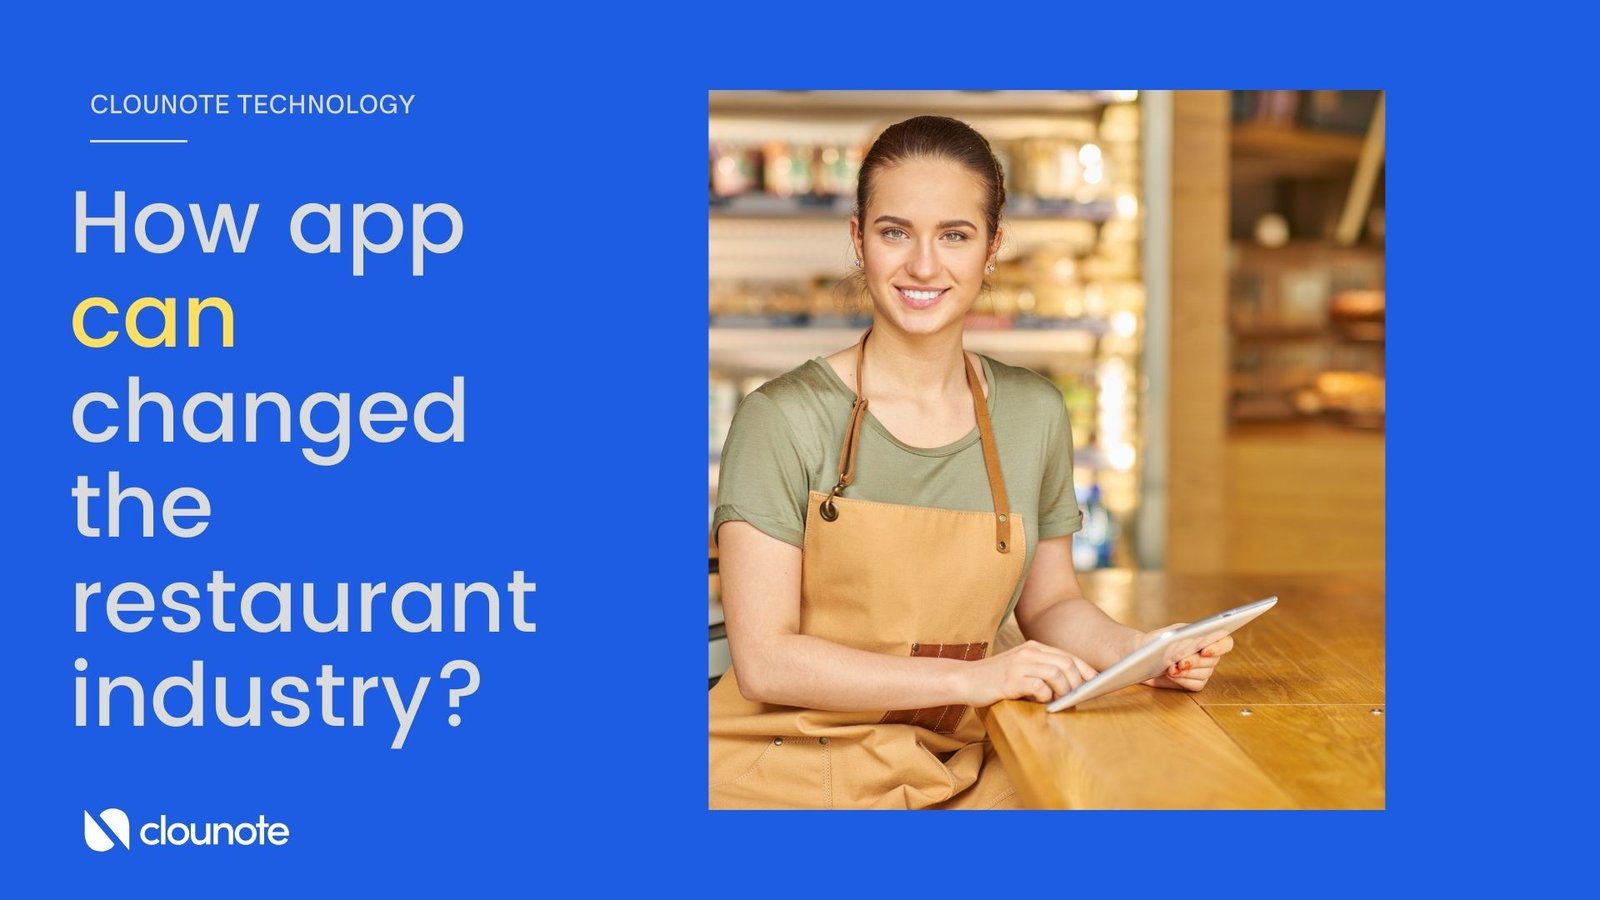 How online ordering apps changed the restaurant industry?